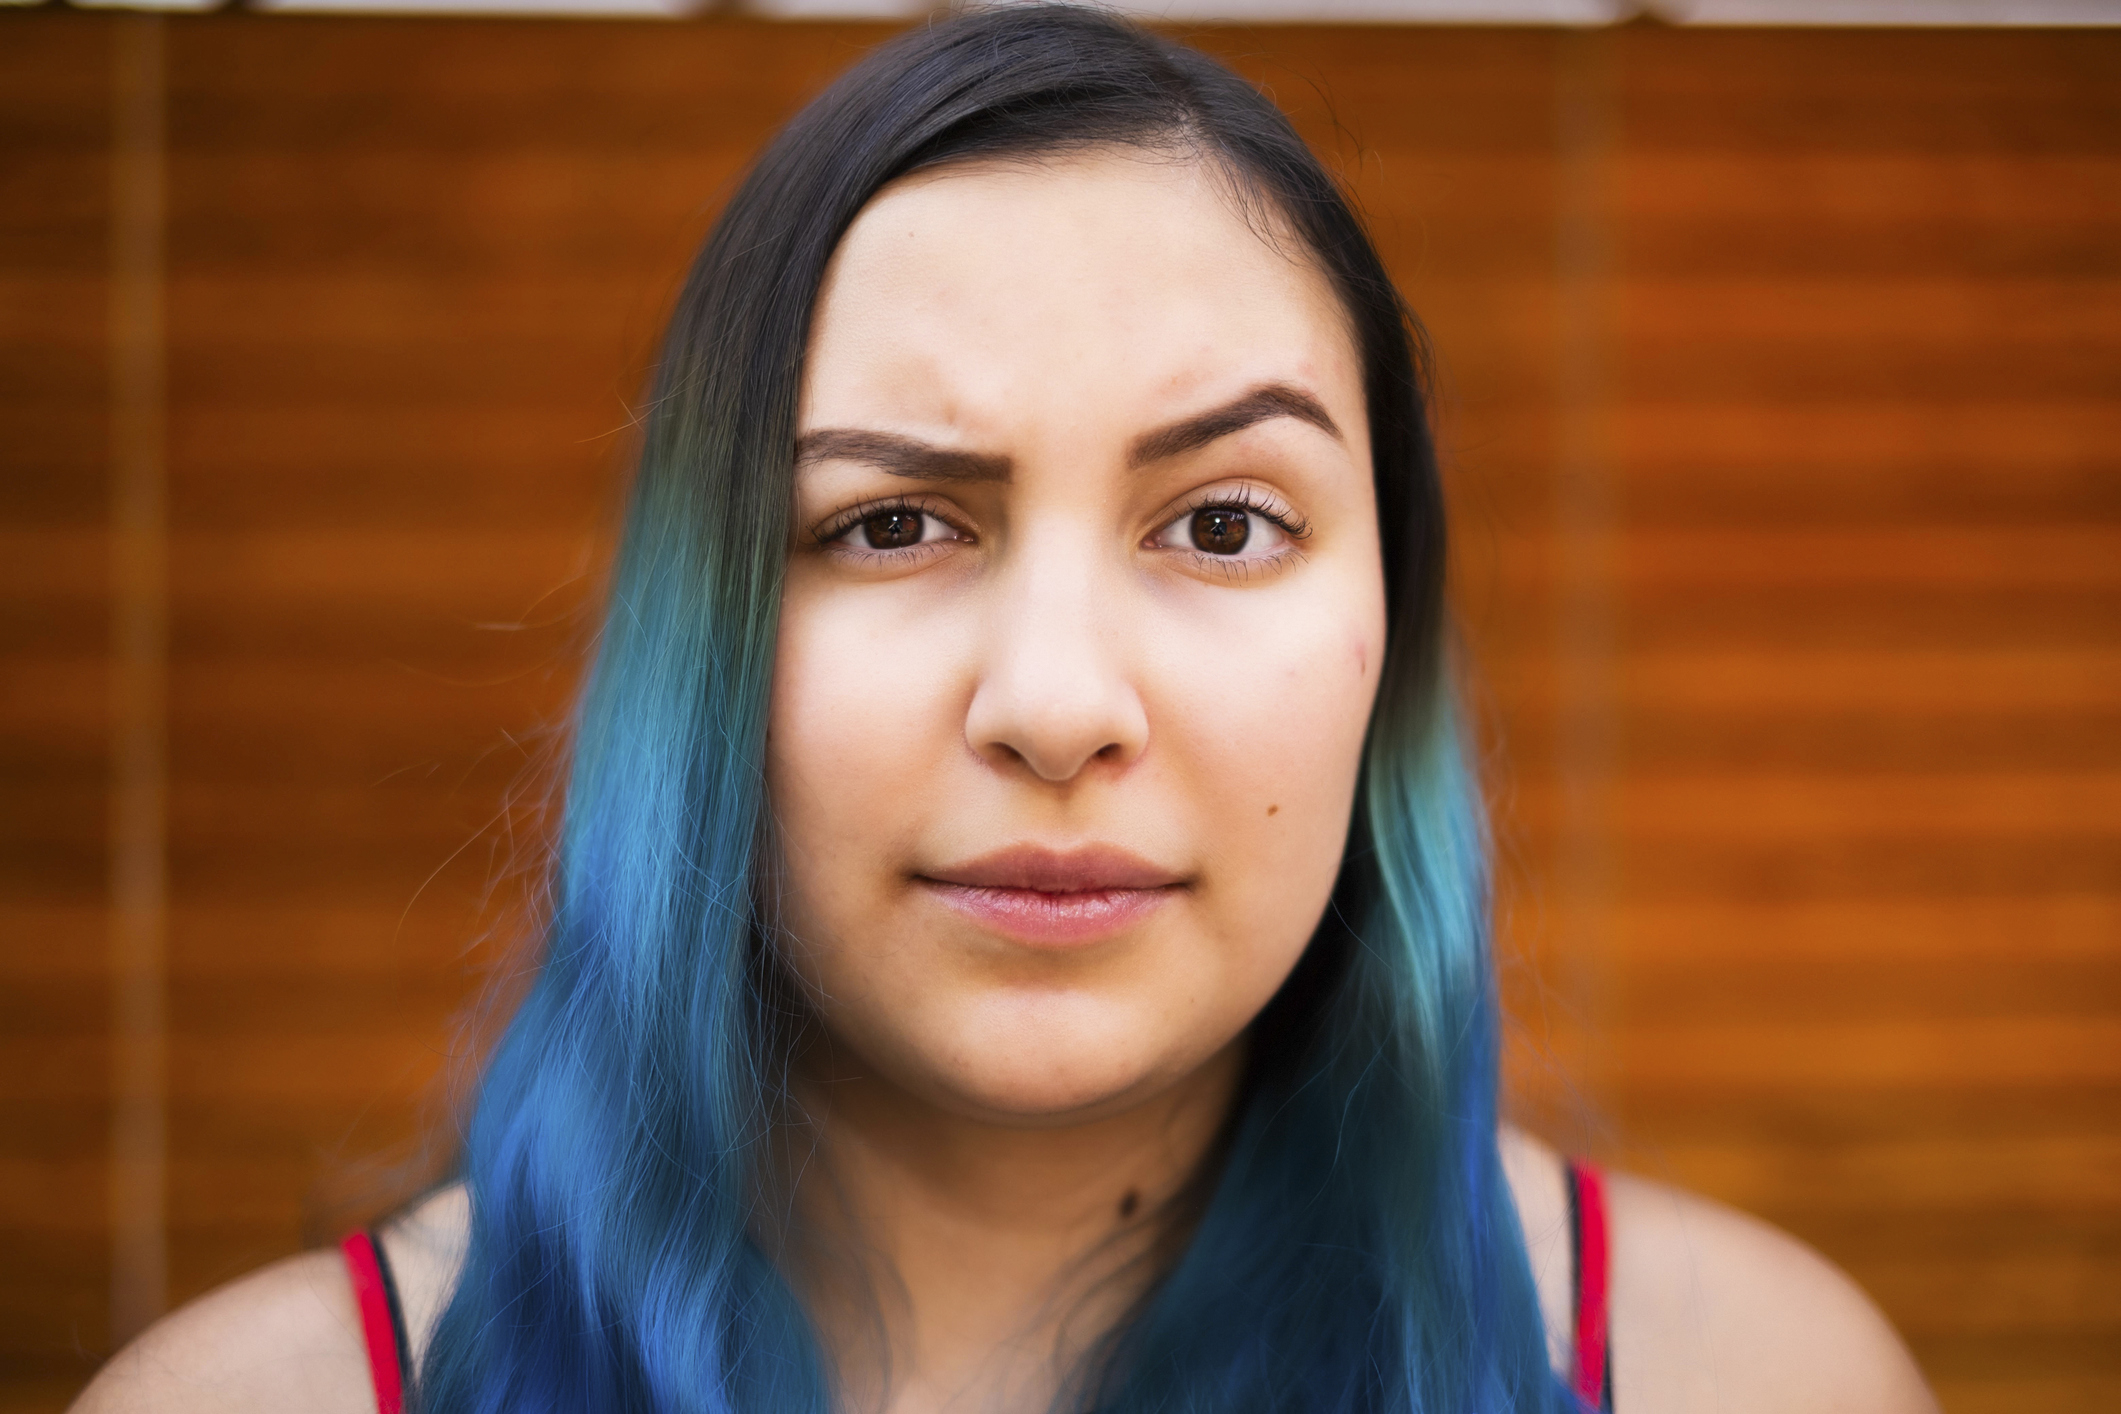 Woman with blue hair looking directly at the camera with a neutral expression